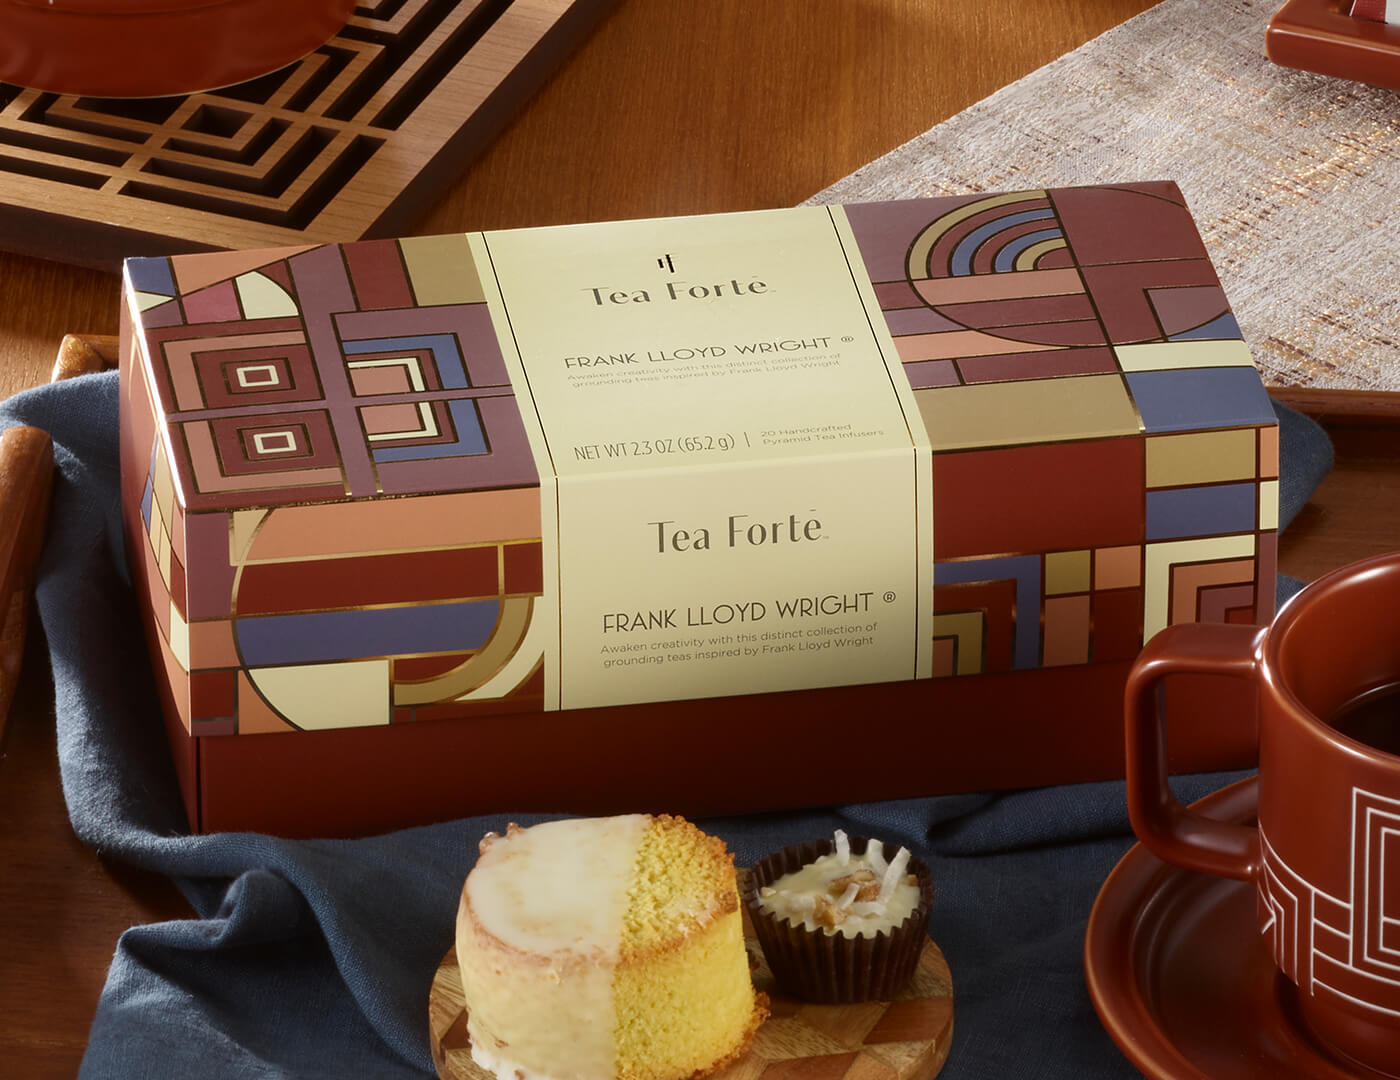 Frank Lloyd Wright Presentation Box,  closed on a table with dessert and teacup